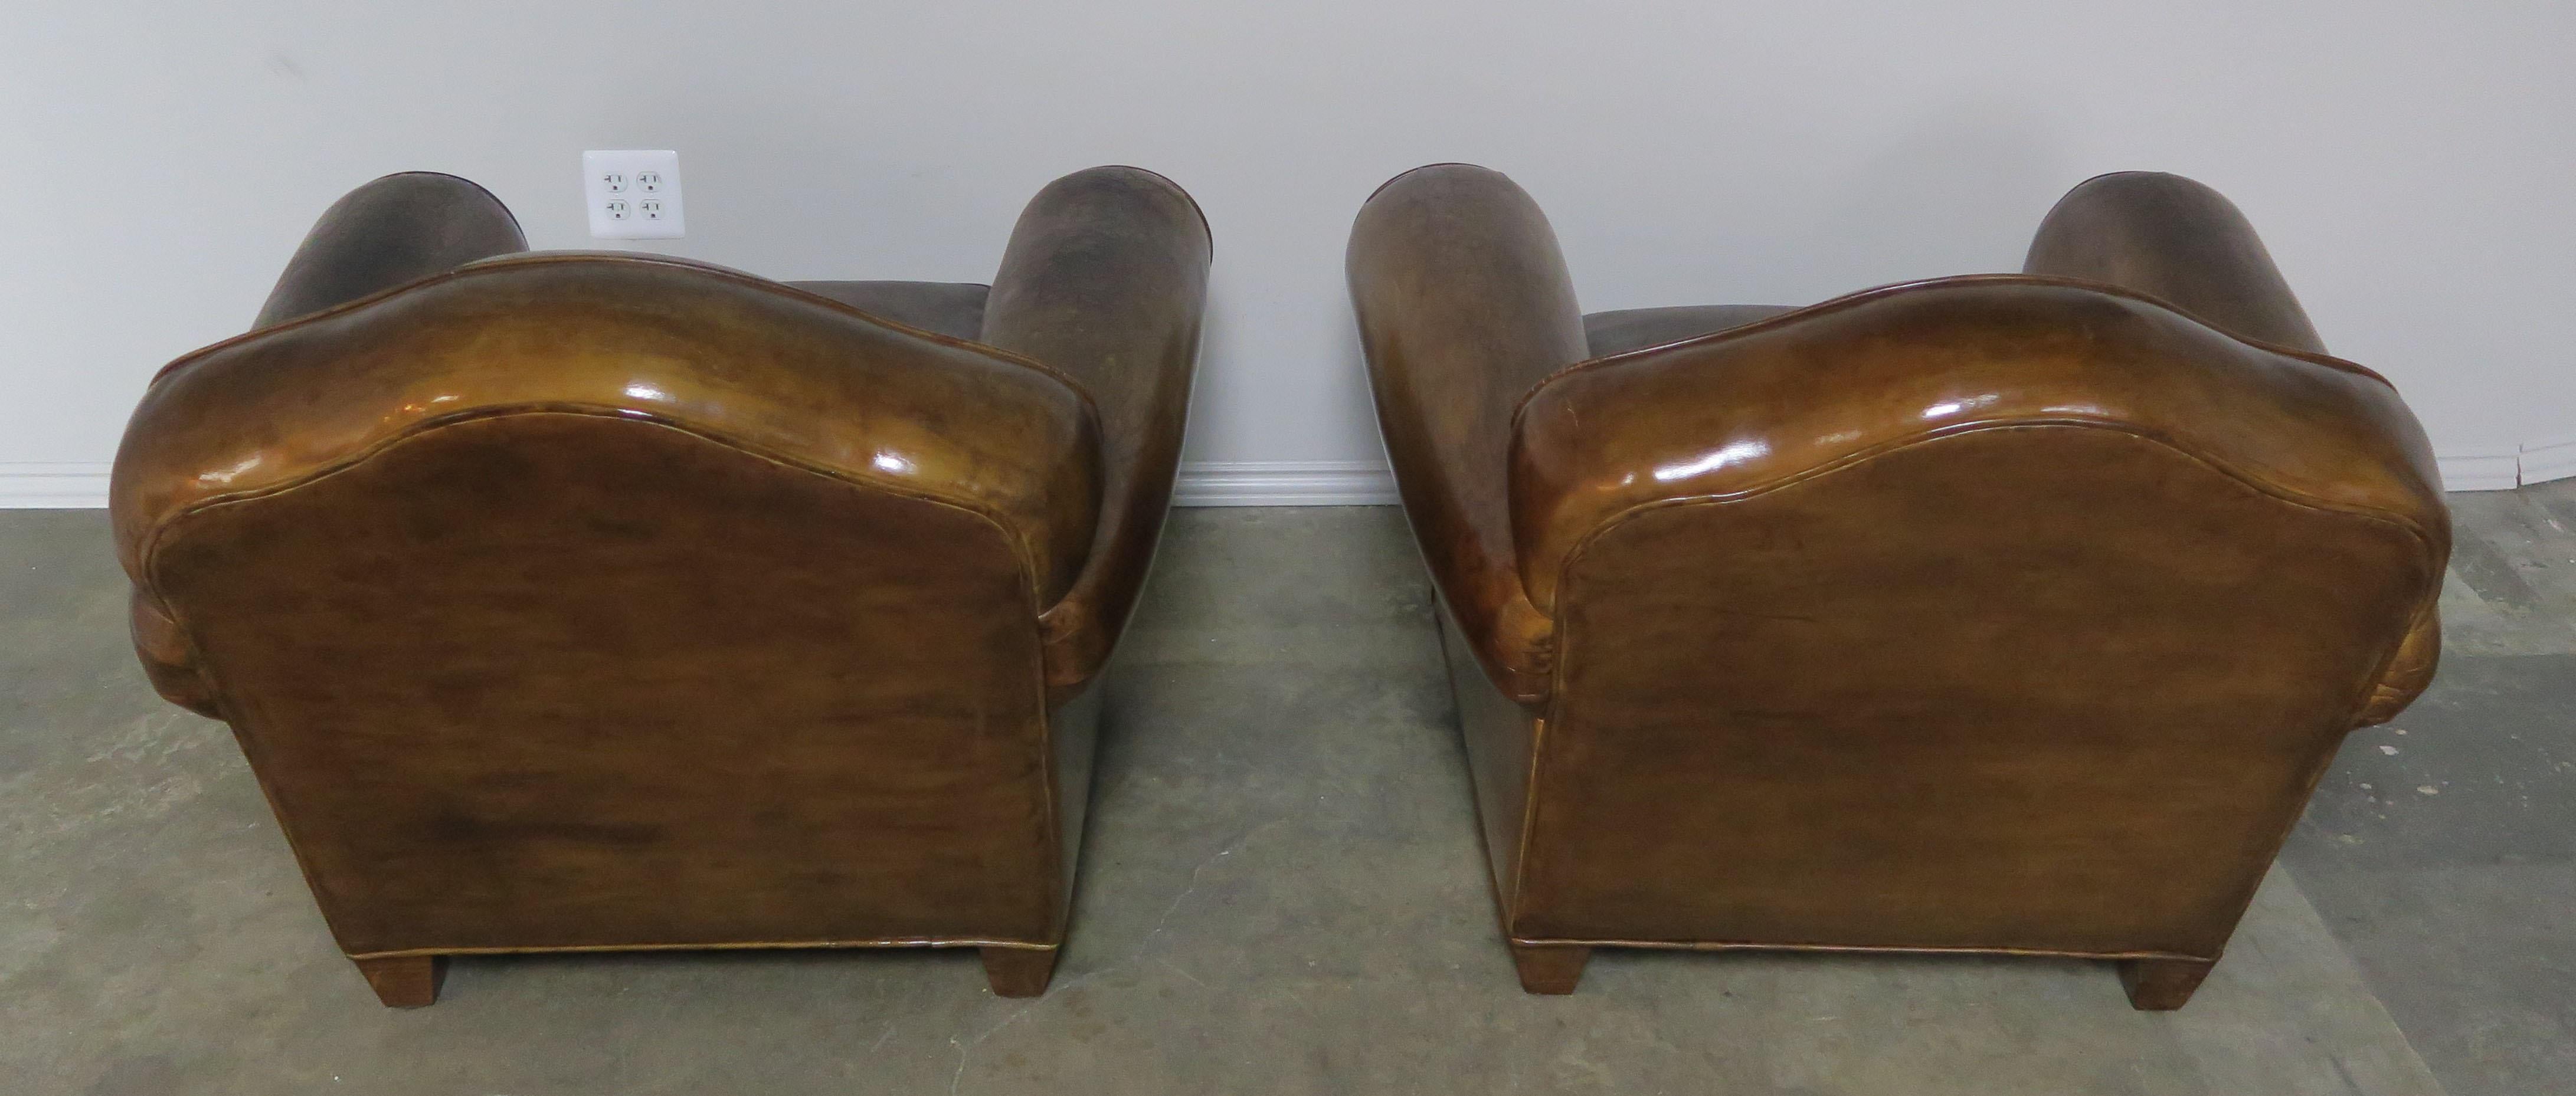 Pair of French Leather Upholstered Club Chairs, circa 1940s 5